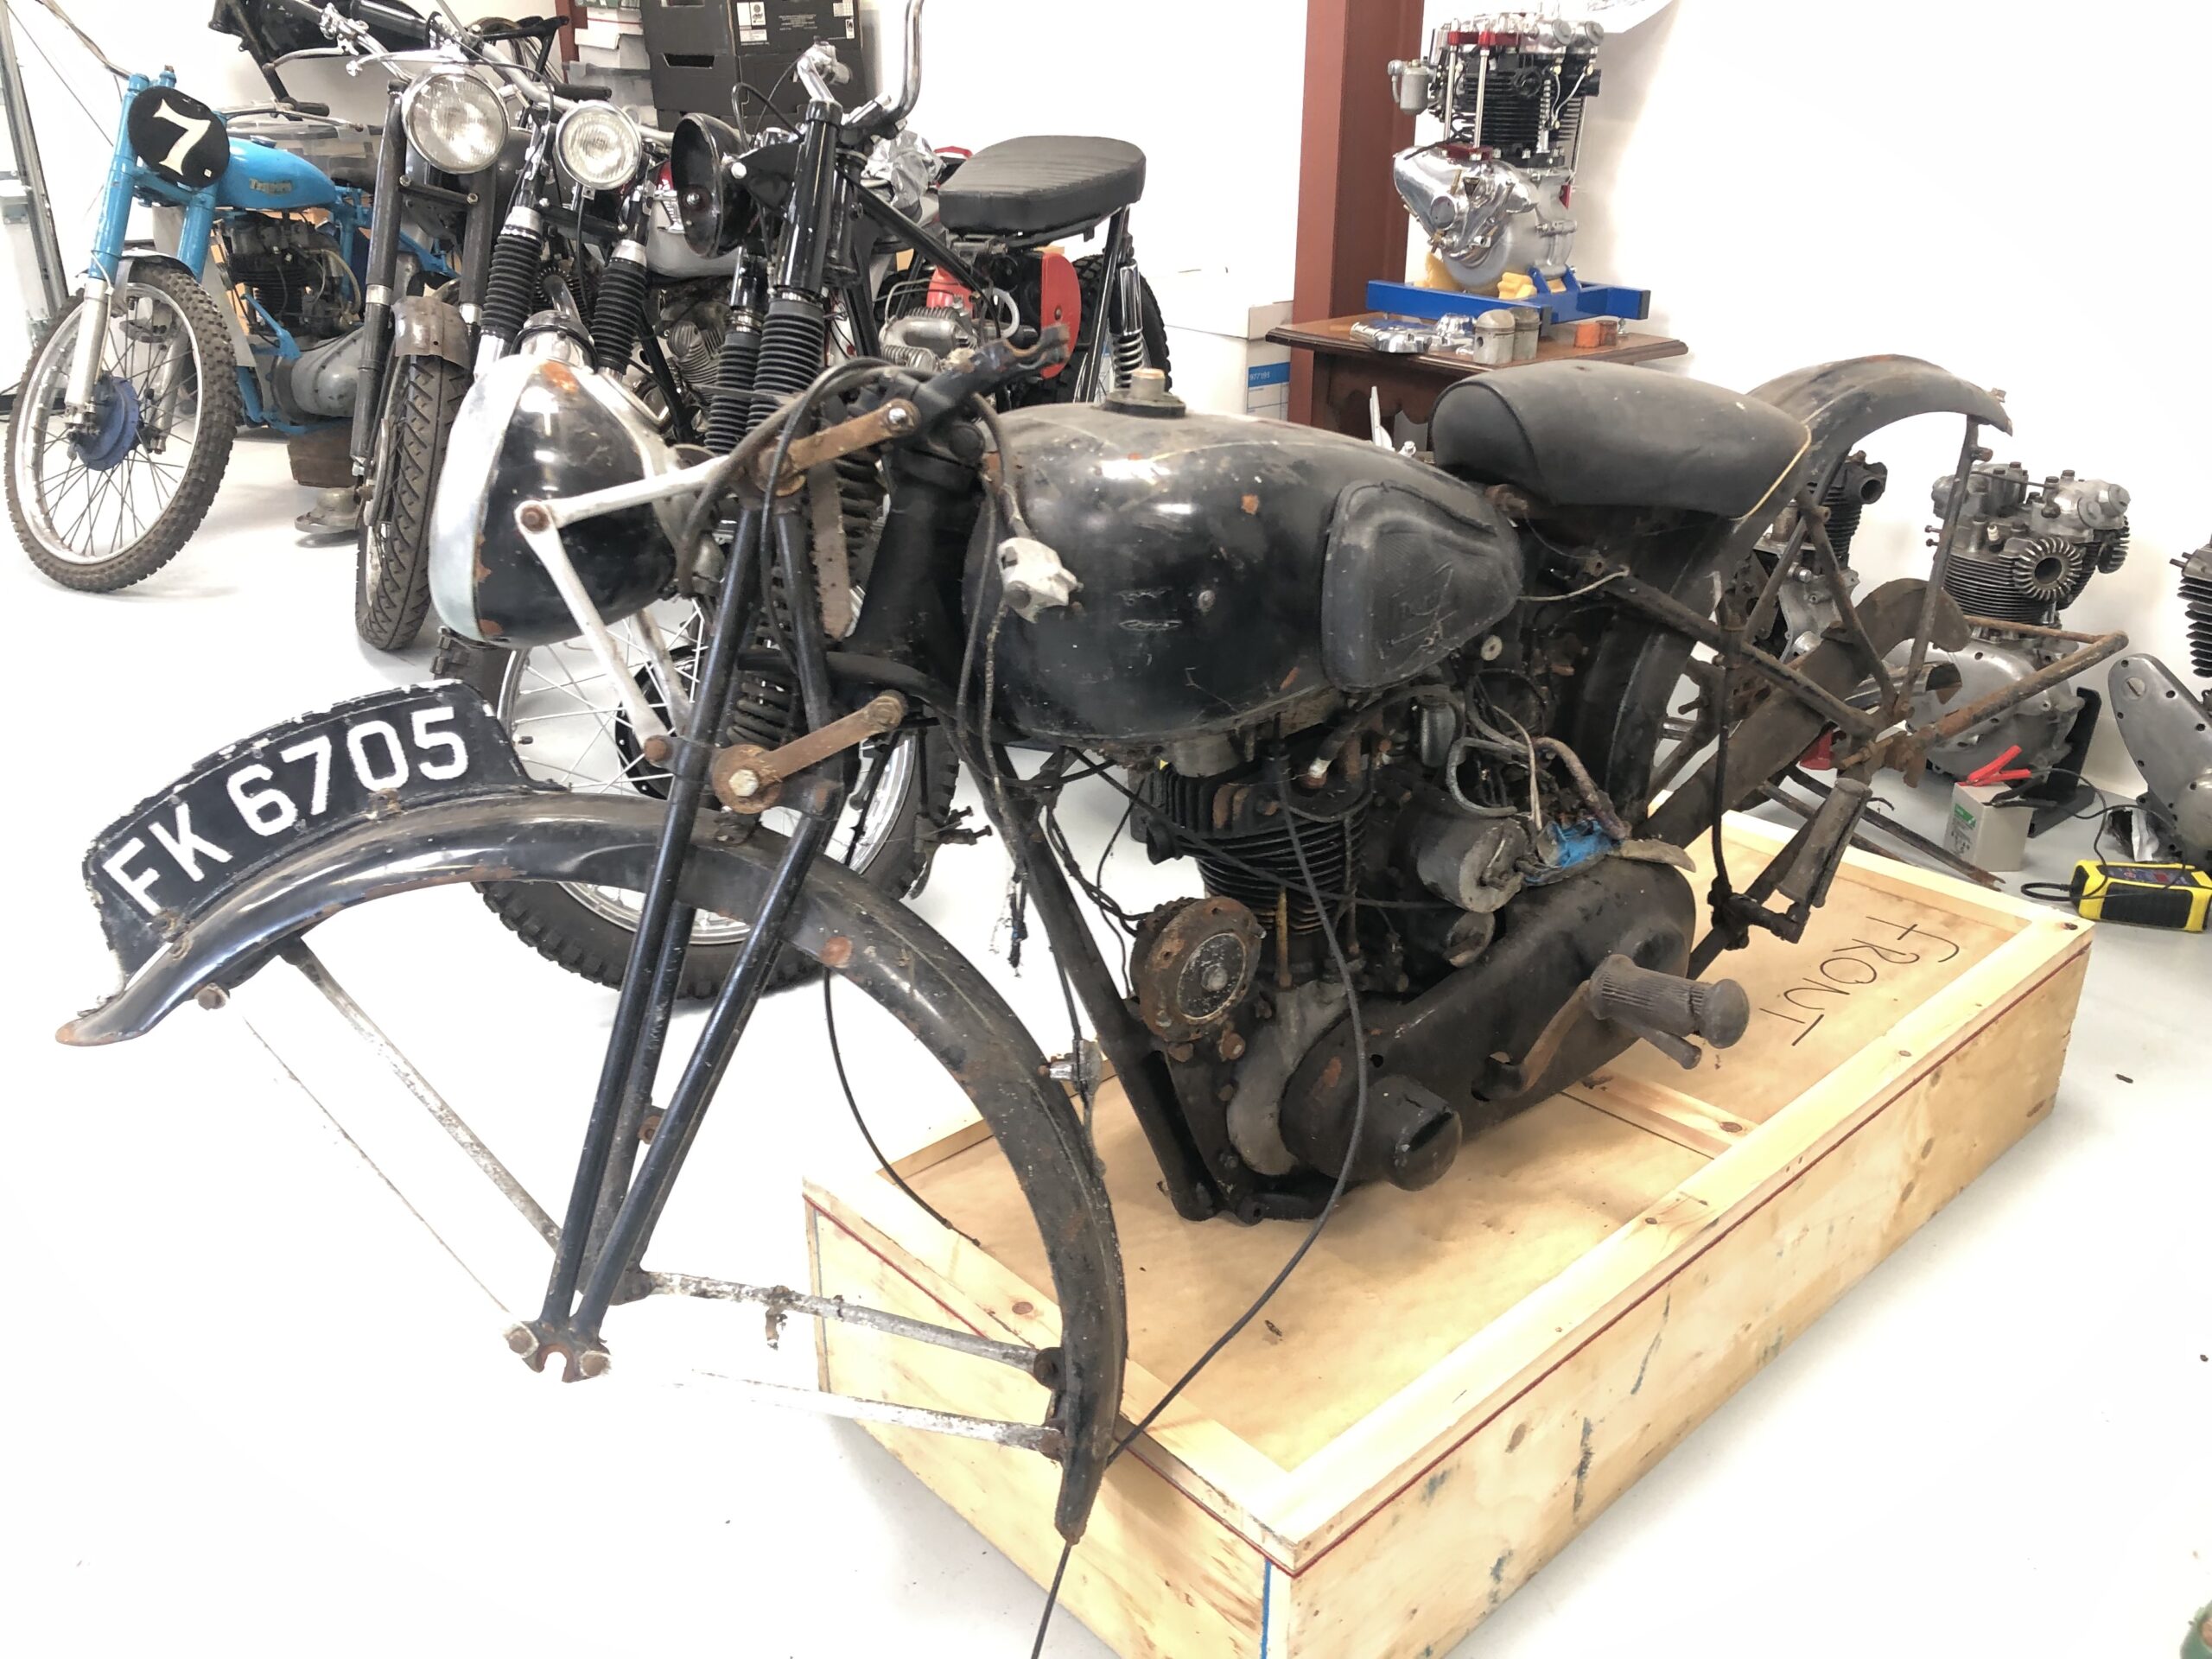 1935 vintage motorcycle Val Page Triumph 250cc 2/1 project with V5. 1930s Rigid frame Triumph for sale with an overhead valve engine. original patina condition